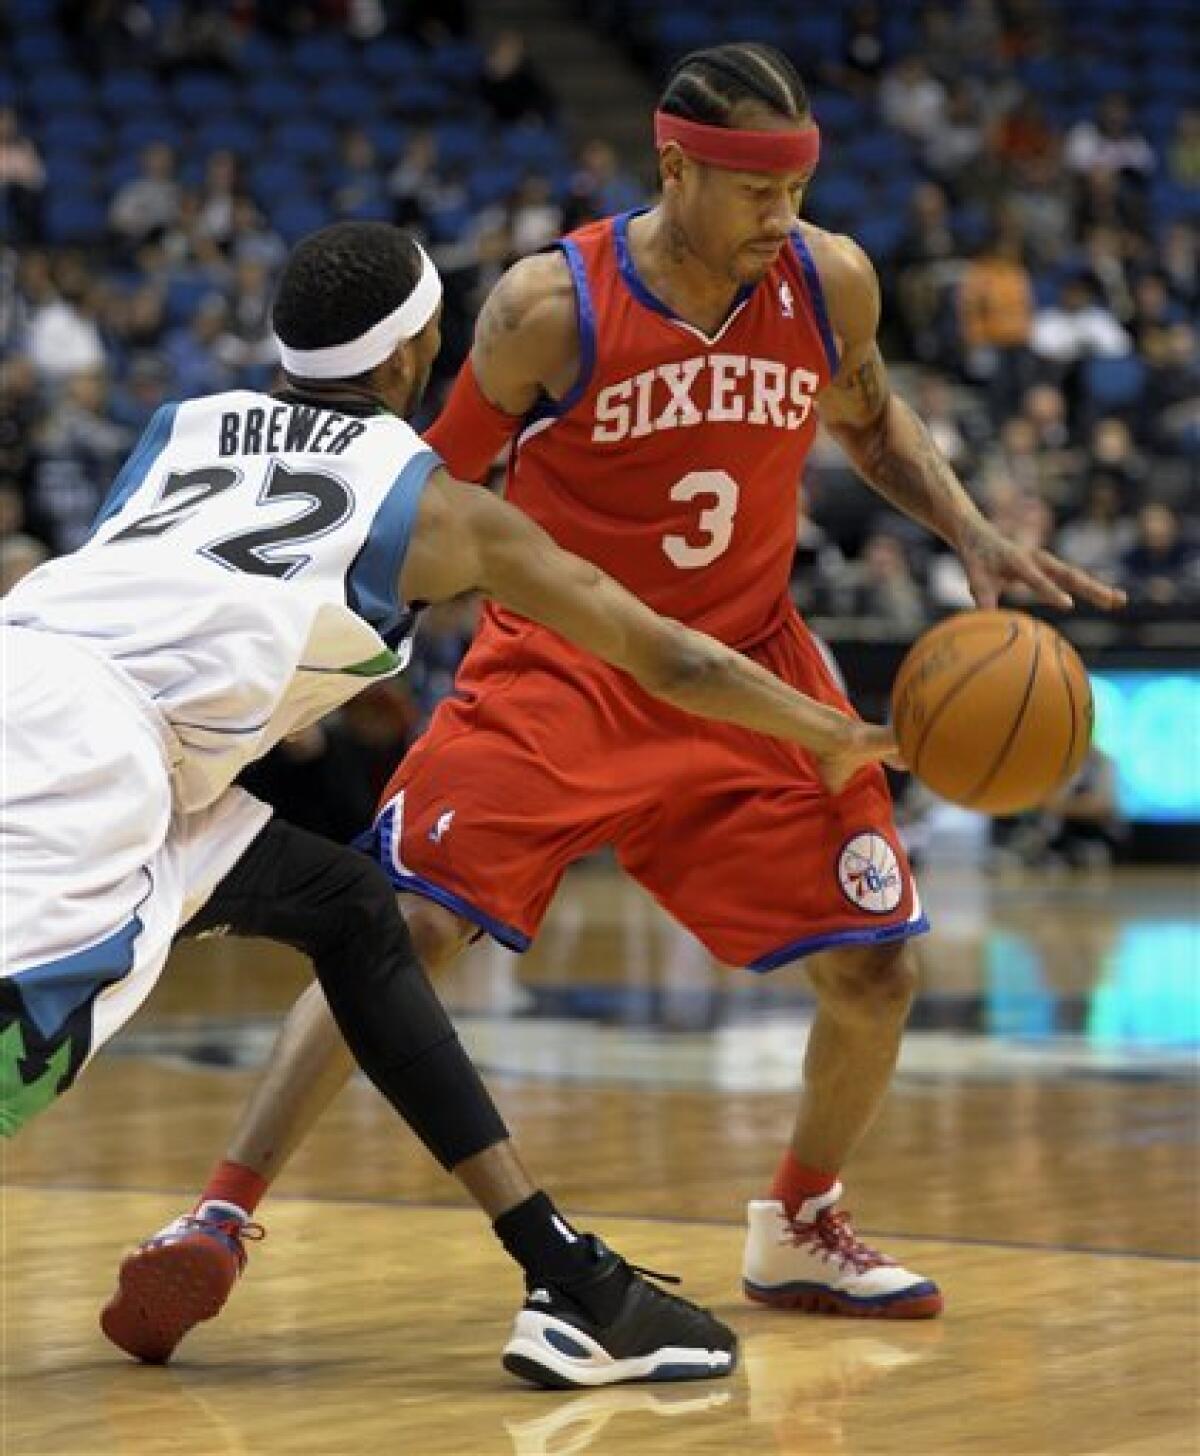 Allen Iverson voted to start in the NBA All-Star Game